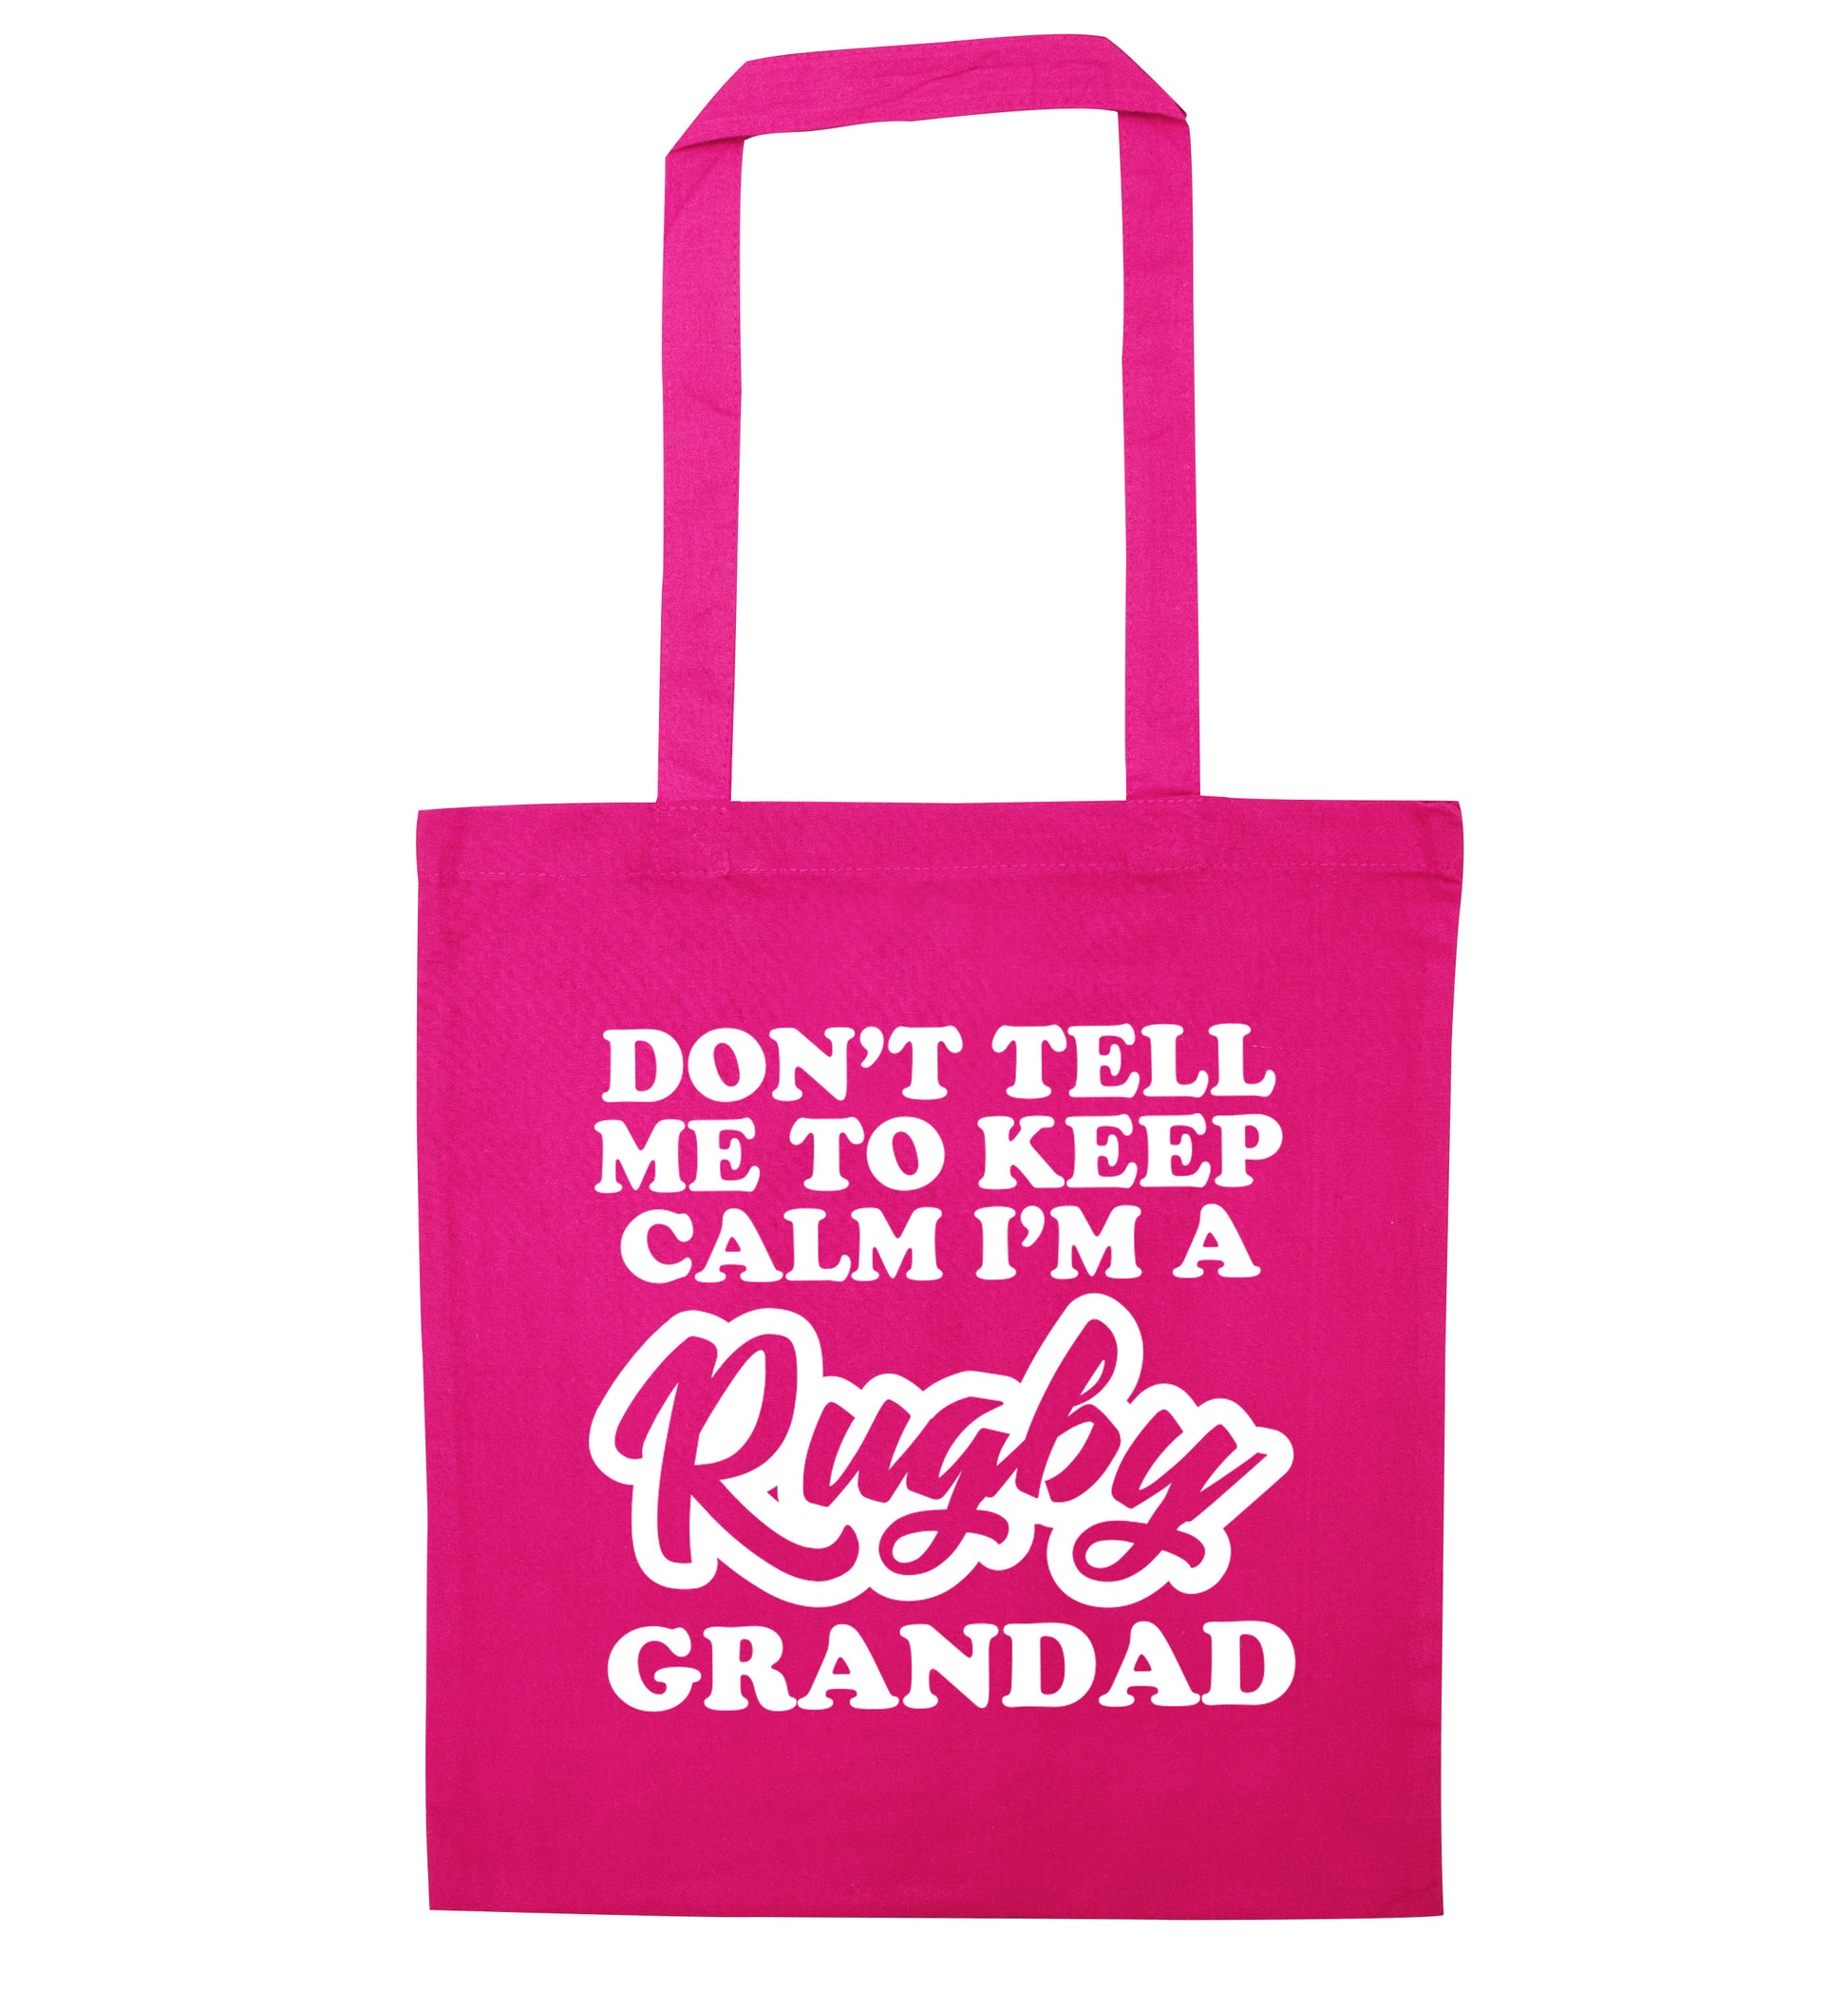 Don't tell me to keep calm I'm a rugby dad pink tote bag